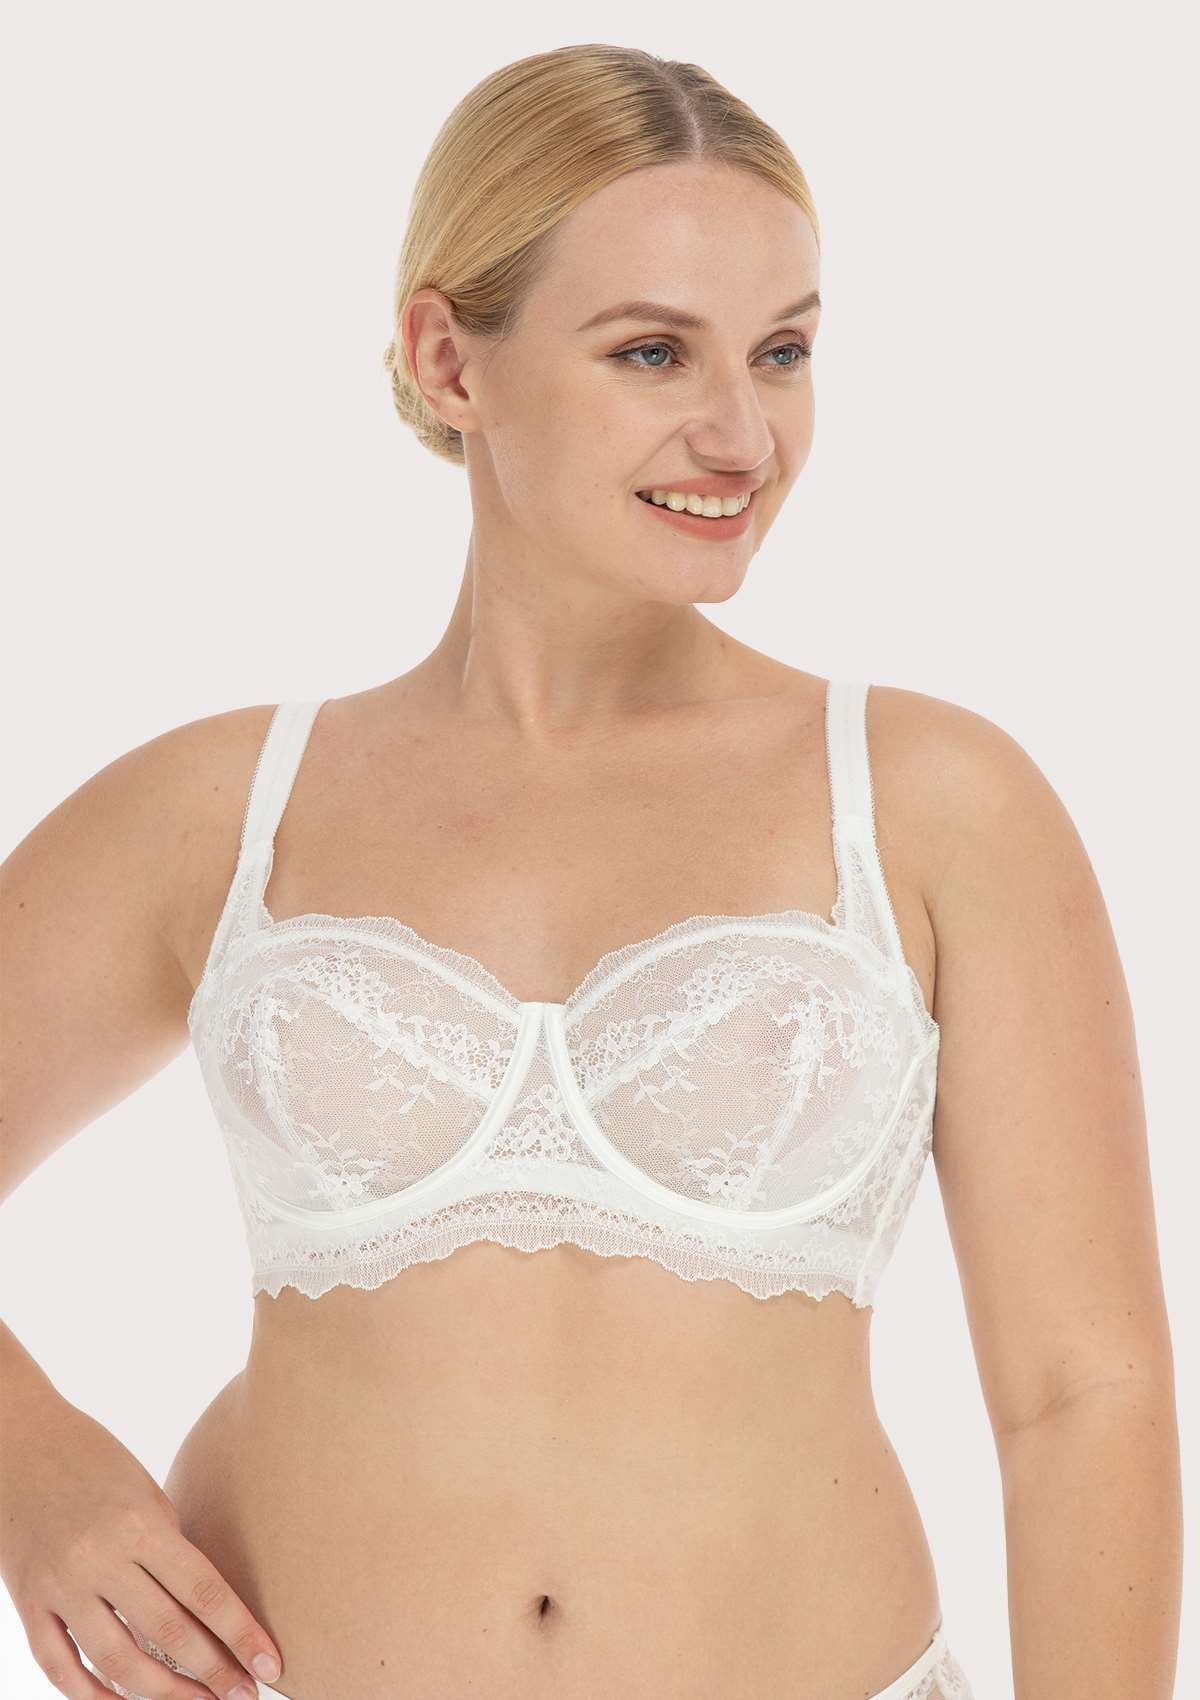 HSIA I Do Floral Lace Bridal Balconette Beautiful Bra For Special Day - Burgundy / 42 / DD/E